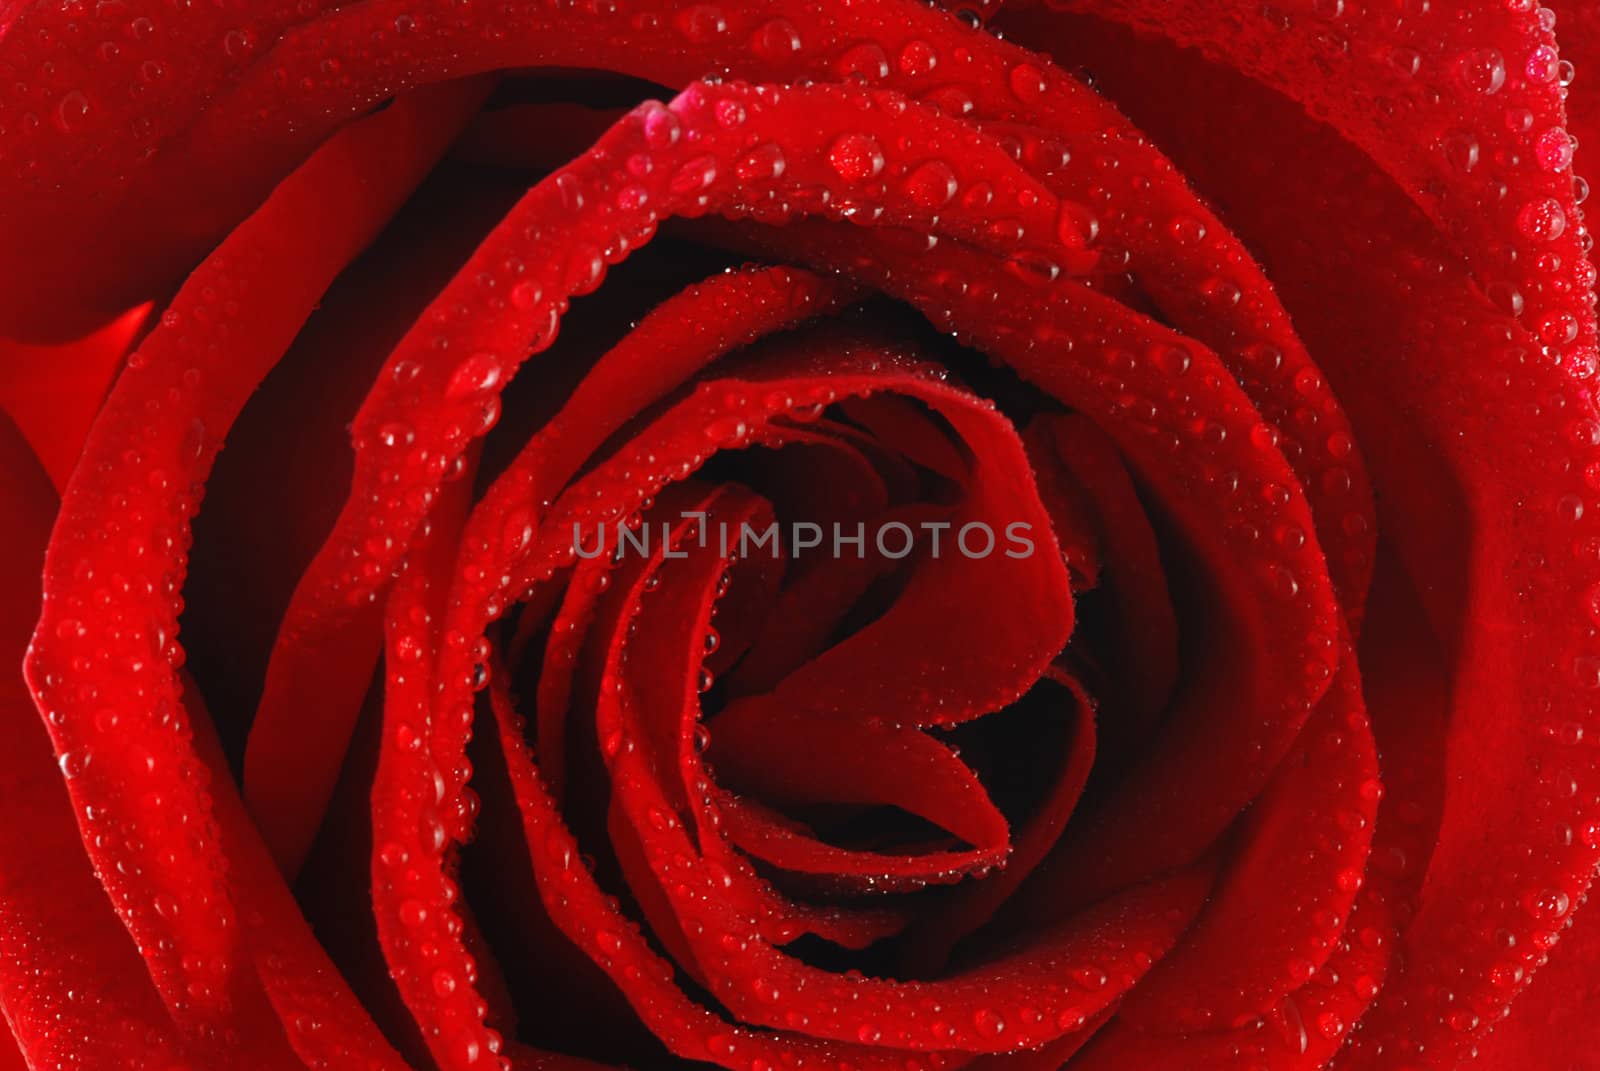 Beautiful red rose background with drops of dew